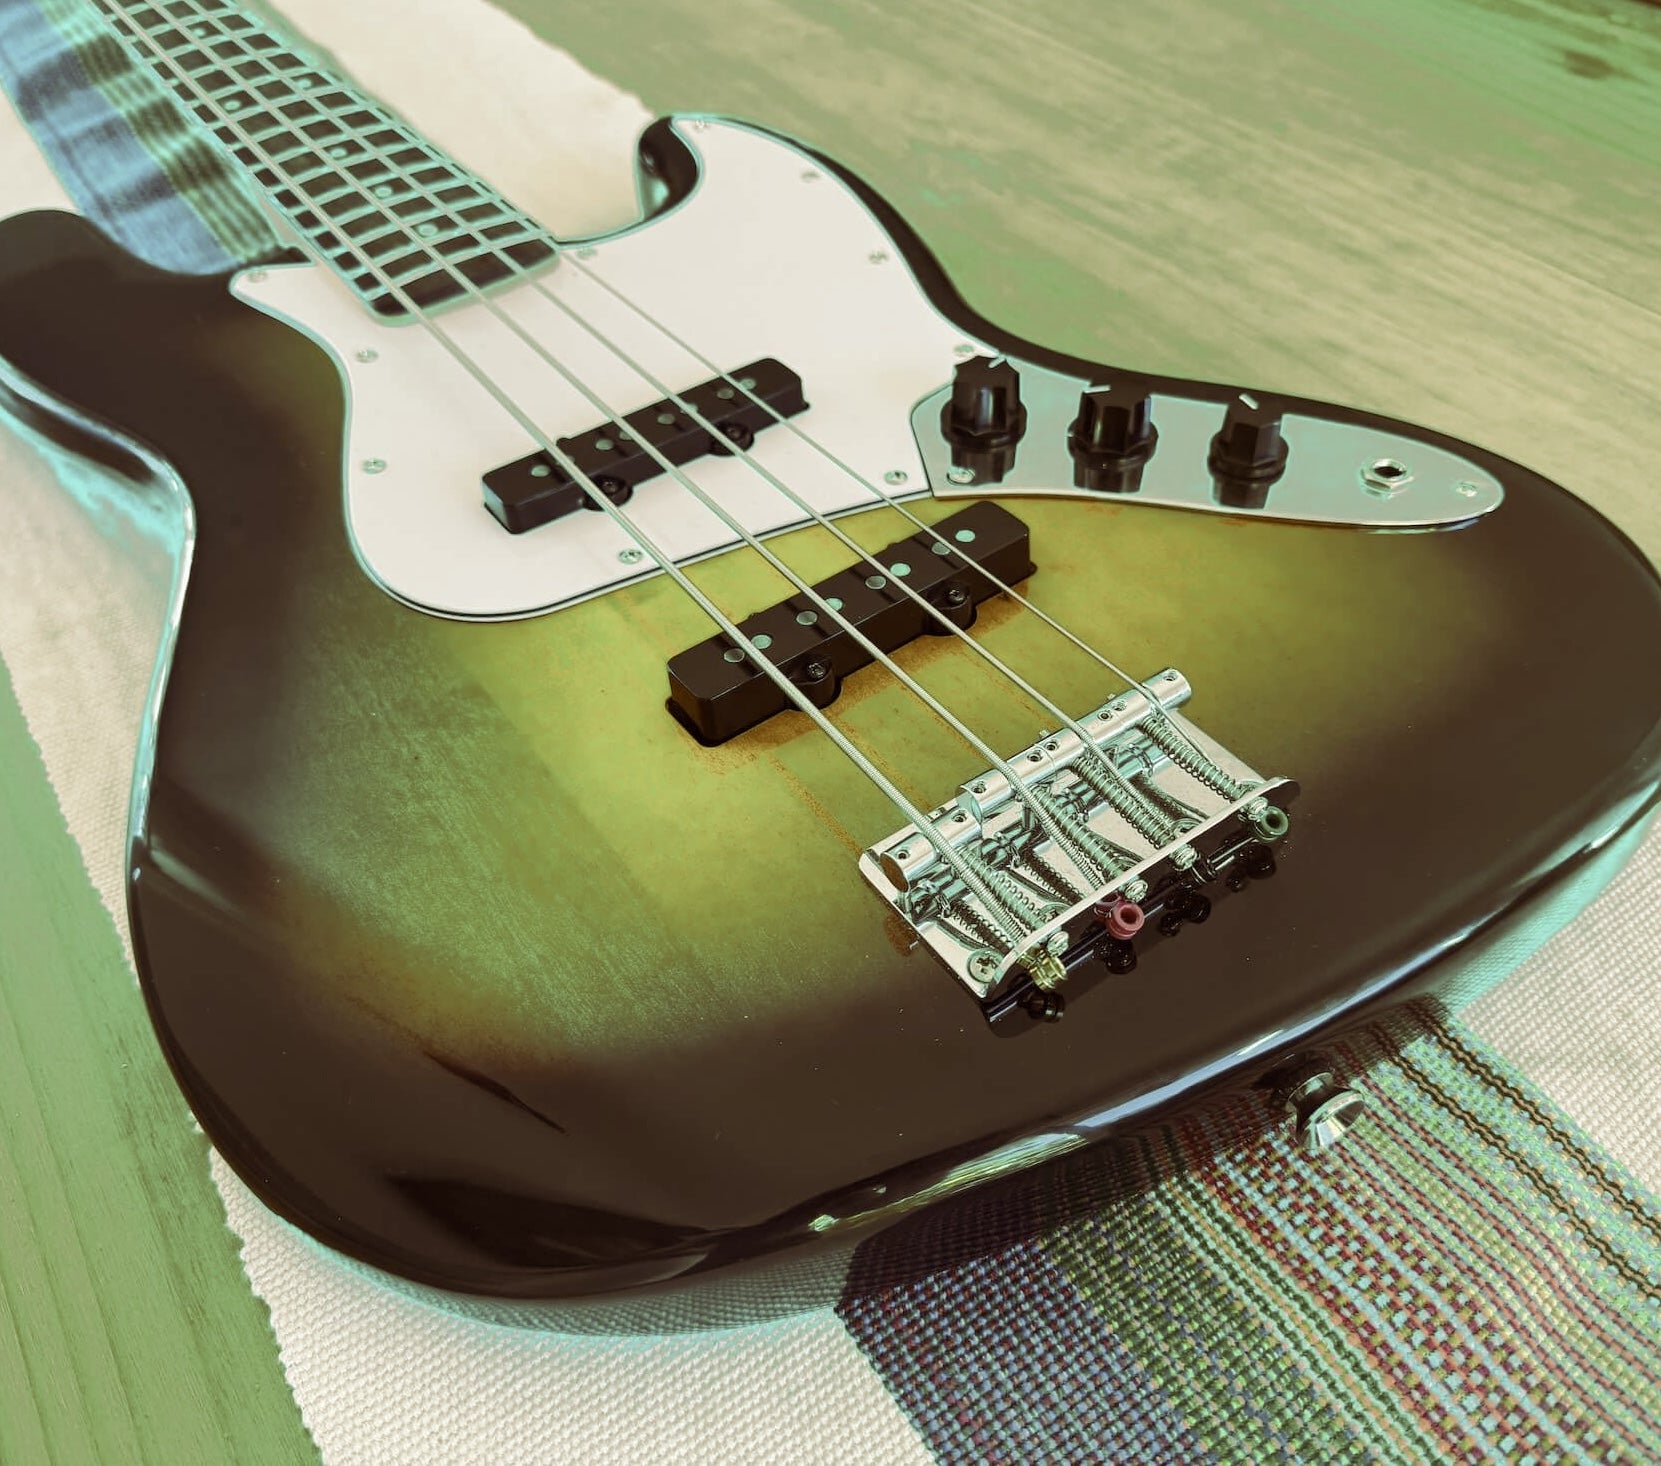 Jazz Bass on table, focused on the body of the bass showing the pickups